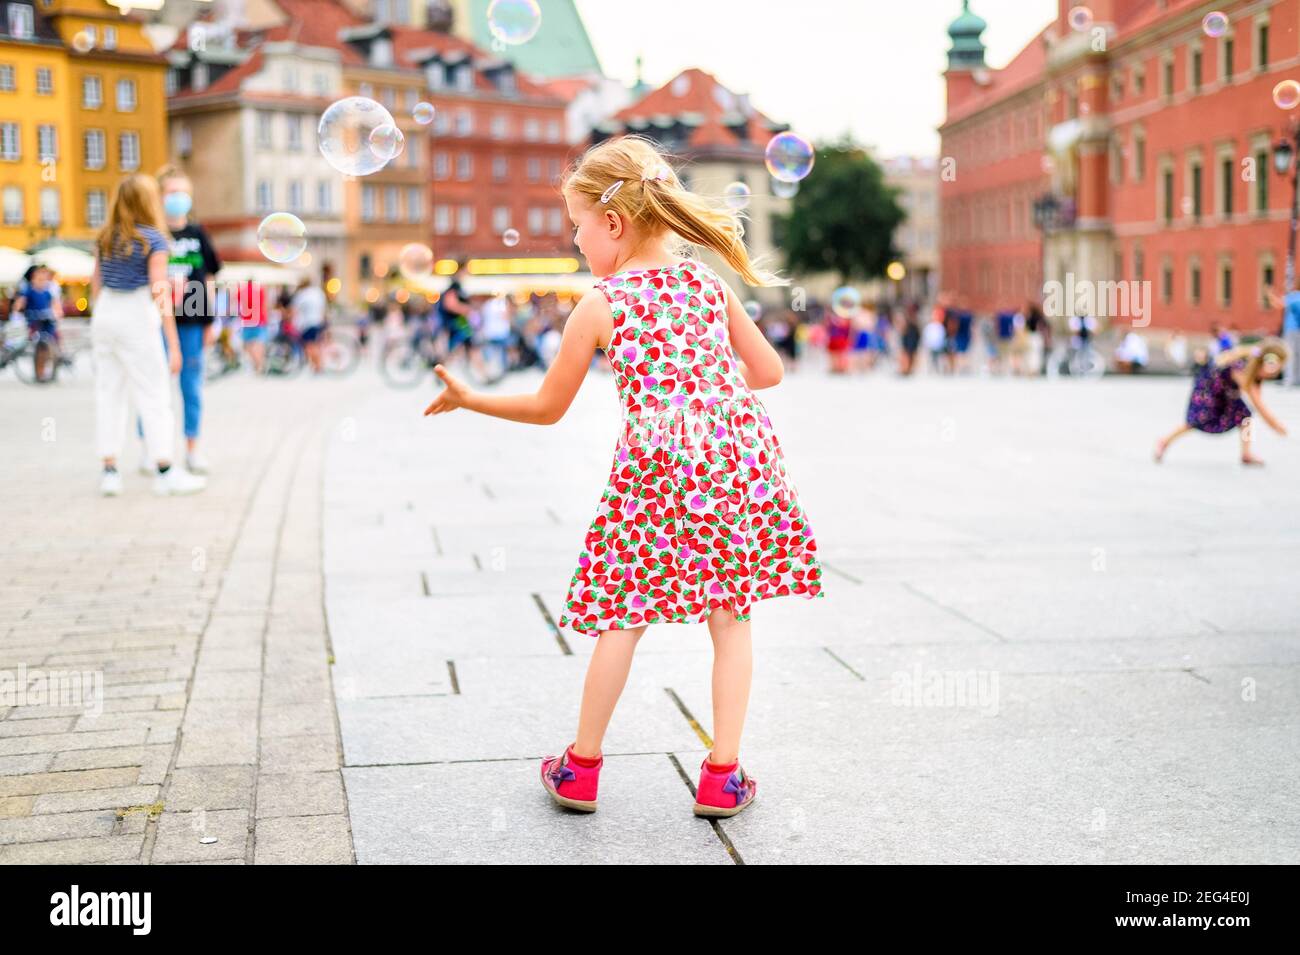 little girl playing with soap bubbles in a city center Stock Photo